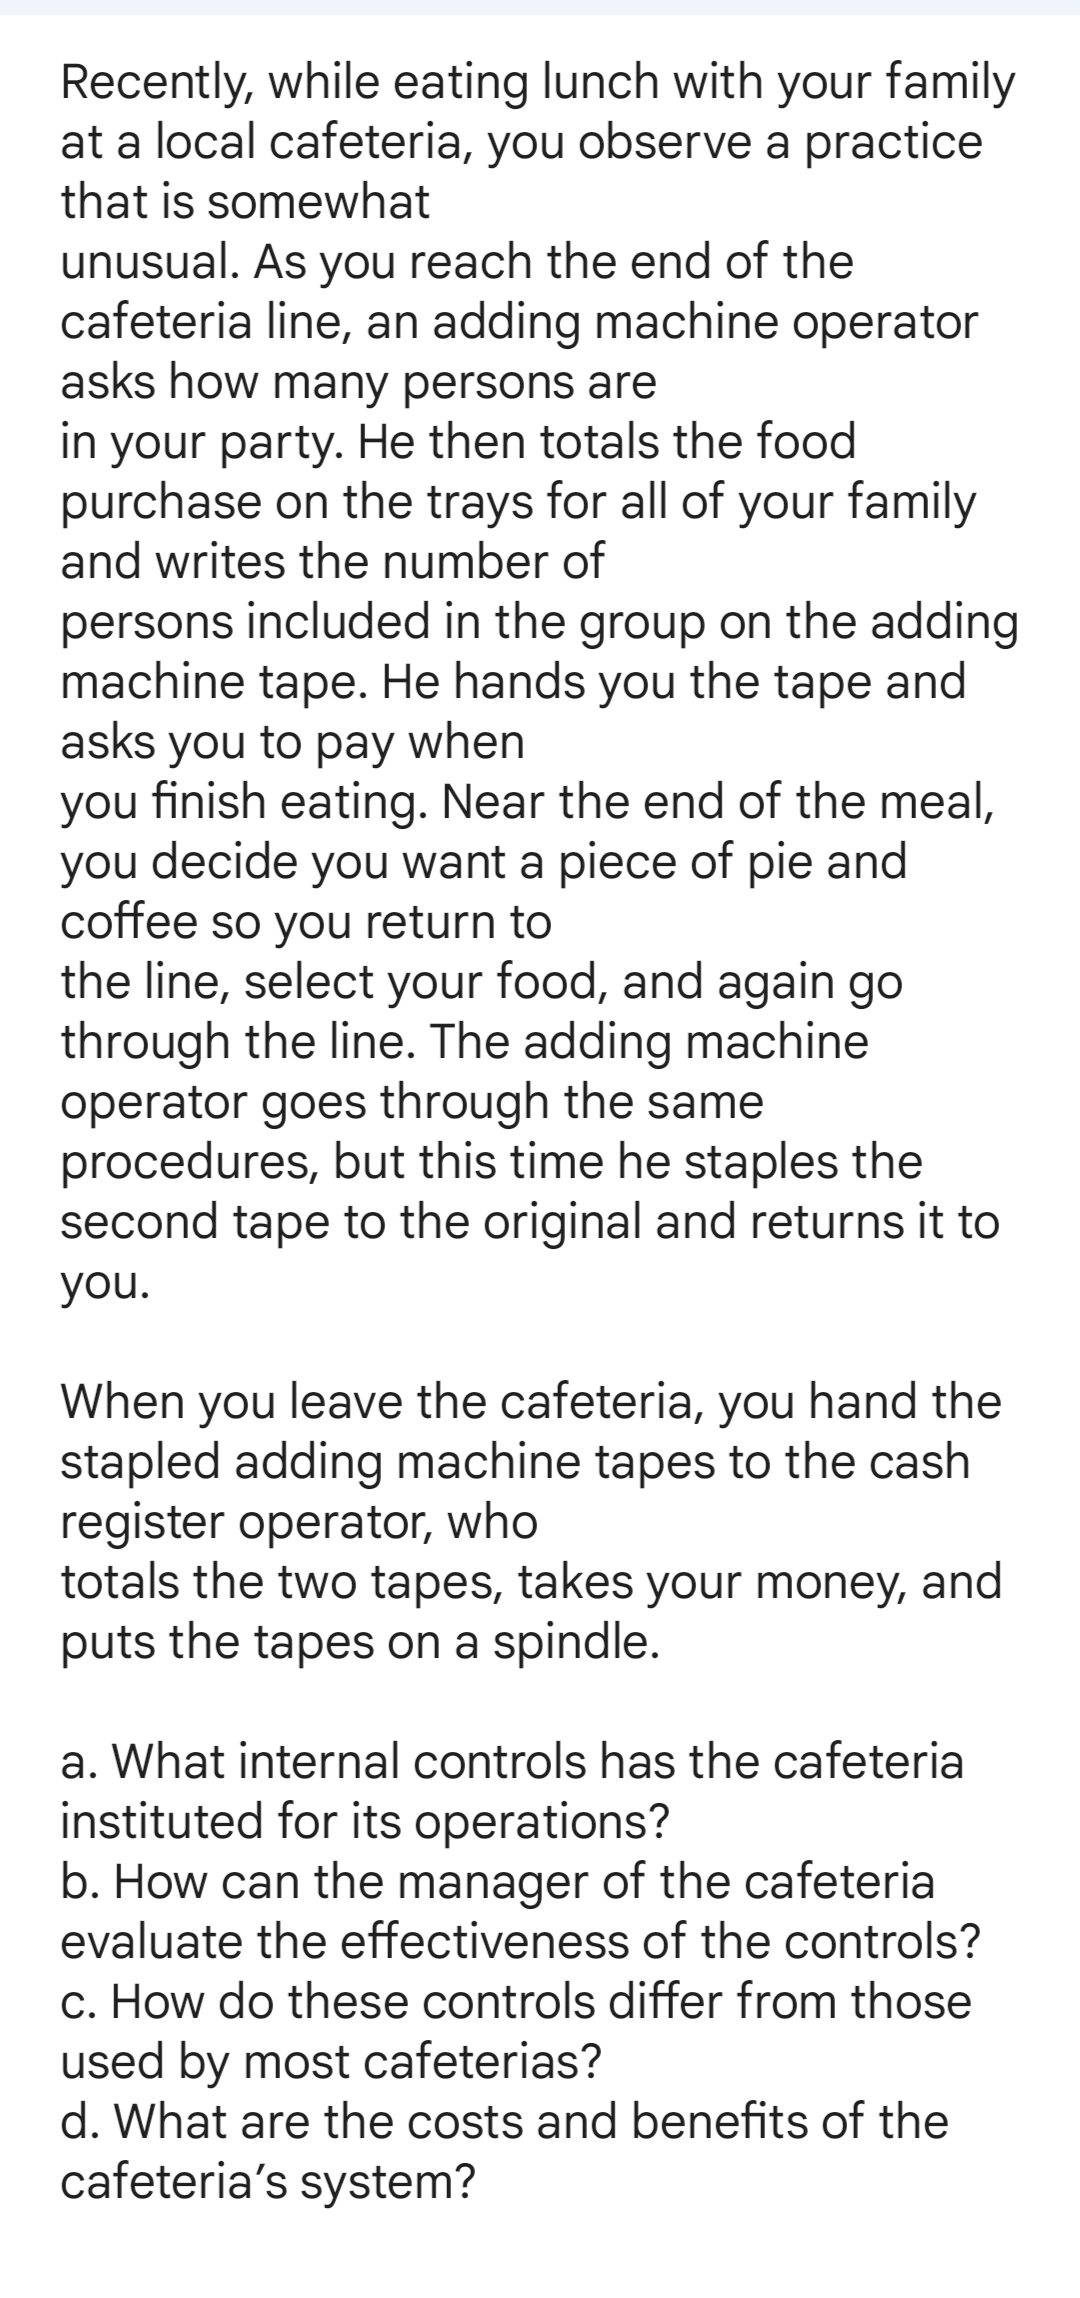 Recently, while eating lunch with your family
at a local cafeteria, you observe a practice
that is somewhat
unusual. As you reach the end of the
cafeteria line, an adding machine operator
asks how many persons are
in your party. He then totals the food
purchase on the trays for all of your family
and writes the number of
persons included in the group on the adding
machine tape. He hands you the tape and
asks you to pay when
you finish eating. Near the end of the meal,
you decide you want a piece of pie and
coffee so you return to
the line, select your food, and again go
through the line. The adding machine
operator goes through the same
procedures, but this time he staples the
second tape to the original and returns it to
you.
When you leave the cafeteria, you hand the
stapled adding machine tapes to the cash
register operator, who
totals the two tapes, takes your money, and
puts the tapes on a spindle.
a. What internal controls has the cafeteria
instituted for its operations?
b. How can the manager of the cafeteria
evaluate the effectiveness of the controls?
c. How do these controls differ from those
used by most cafeterias?
d. What are the costs and benefits of the
cafeteria's system?